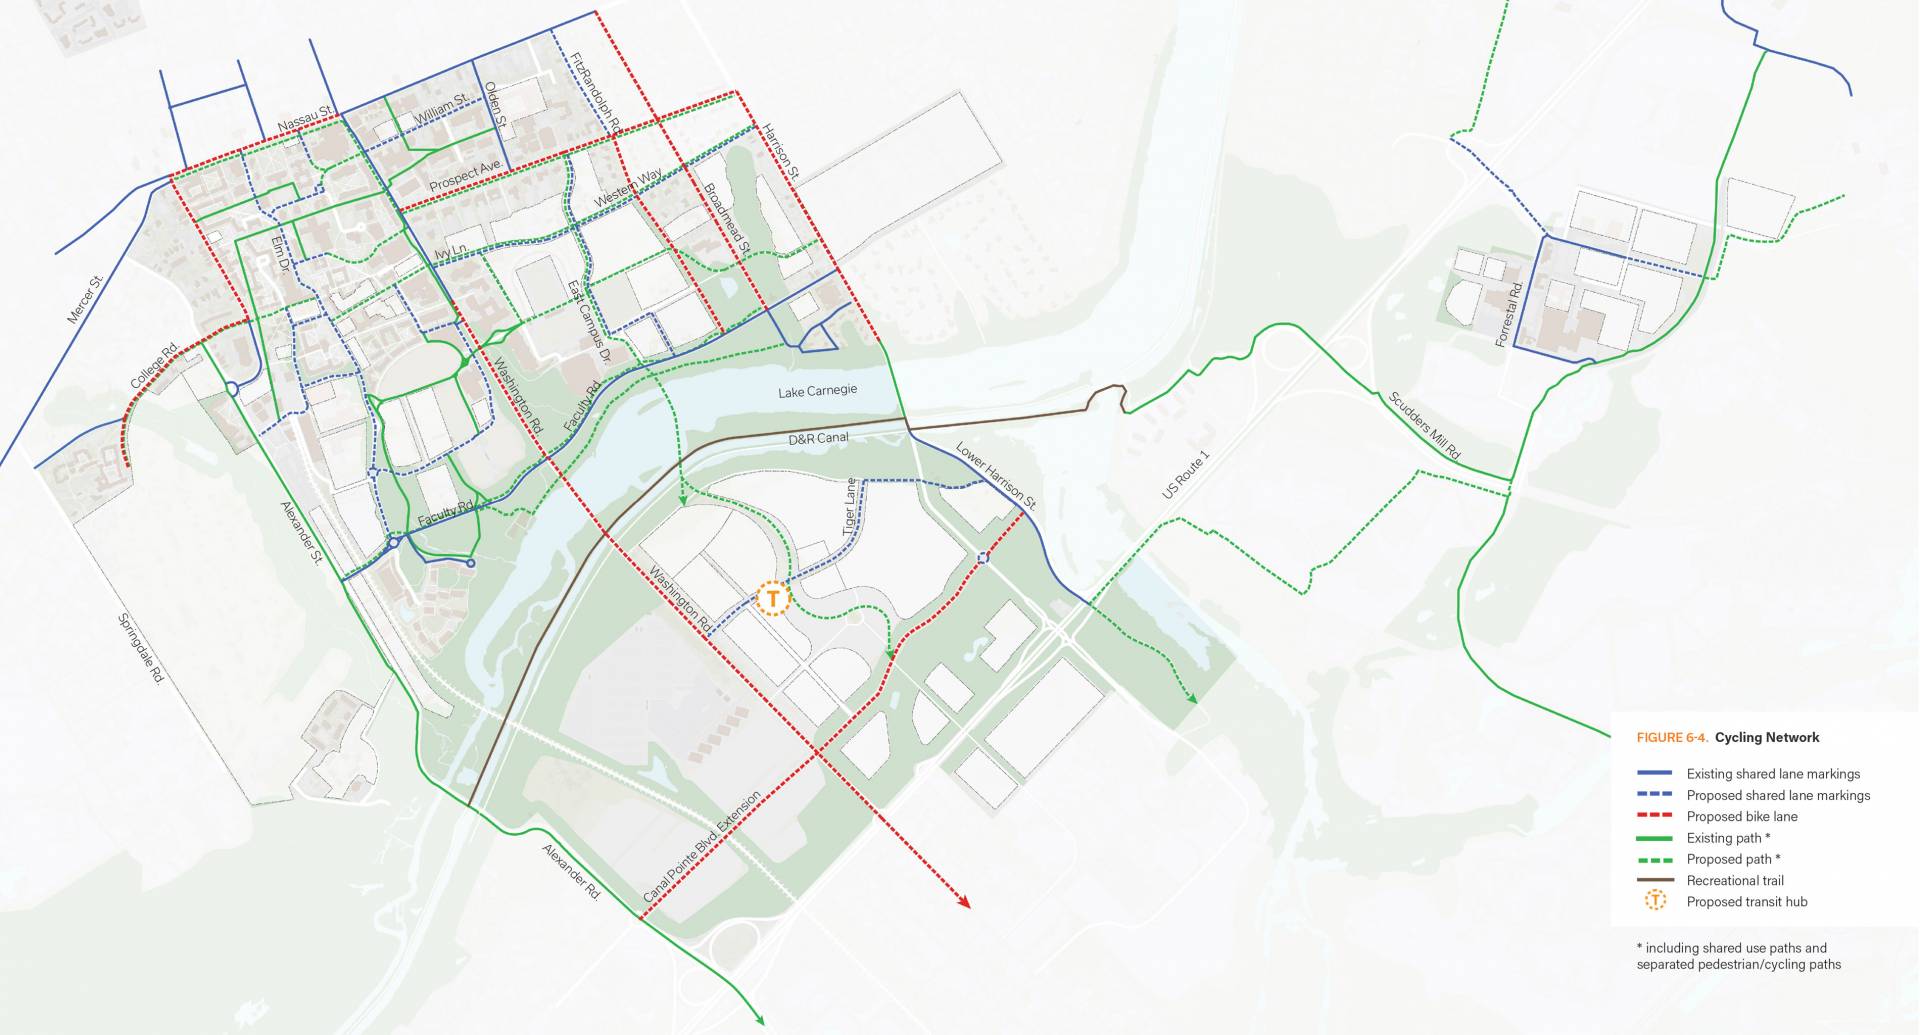 Map of potential cycling network from campus plan